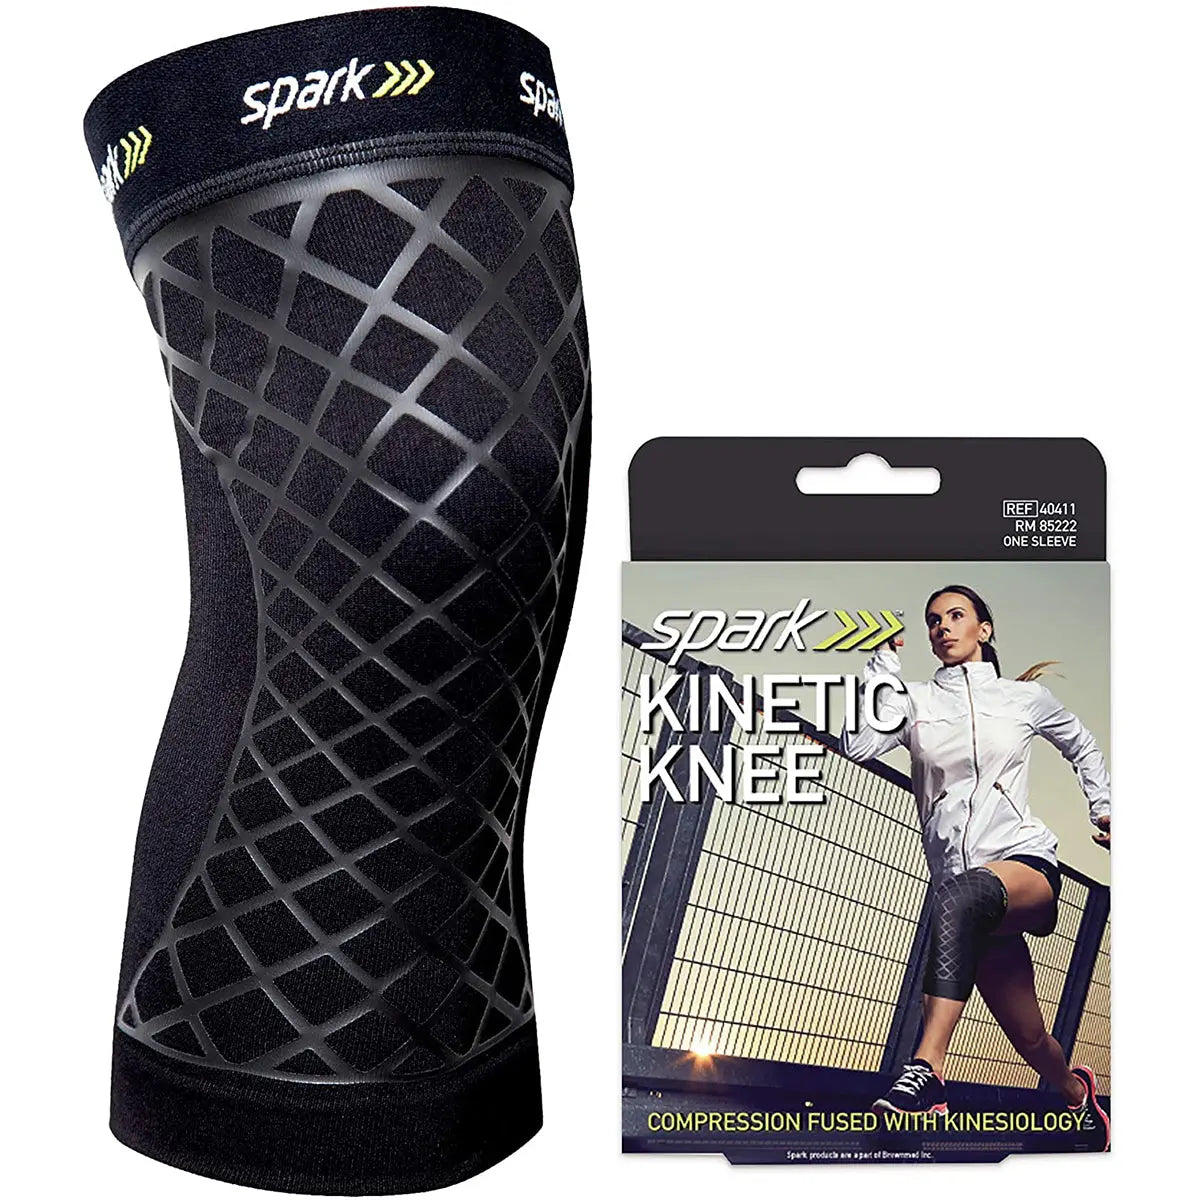 Spark Kinetic Knee Sleeve - Compression Support with Embedded Kinesiology Tape Spark